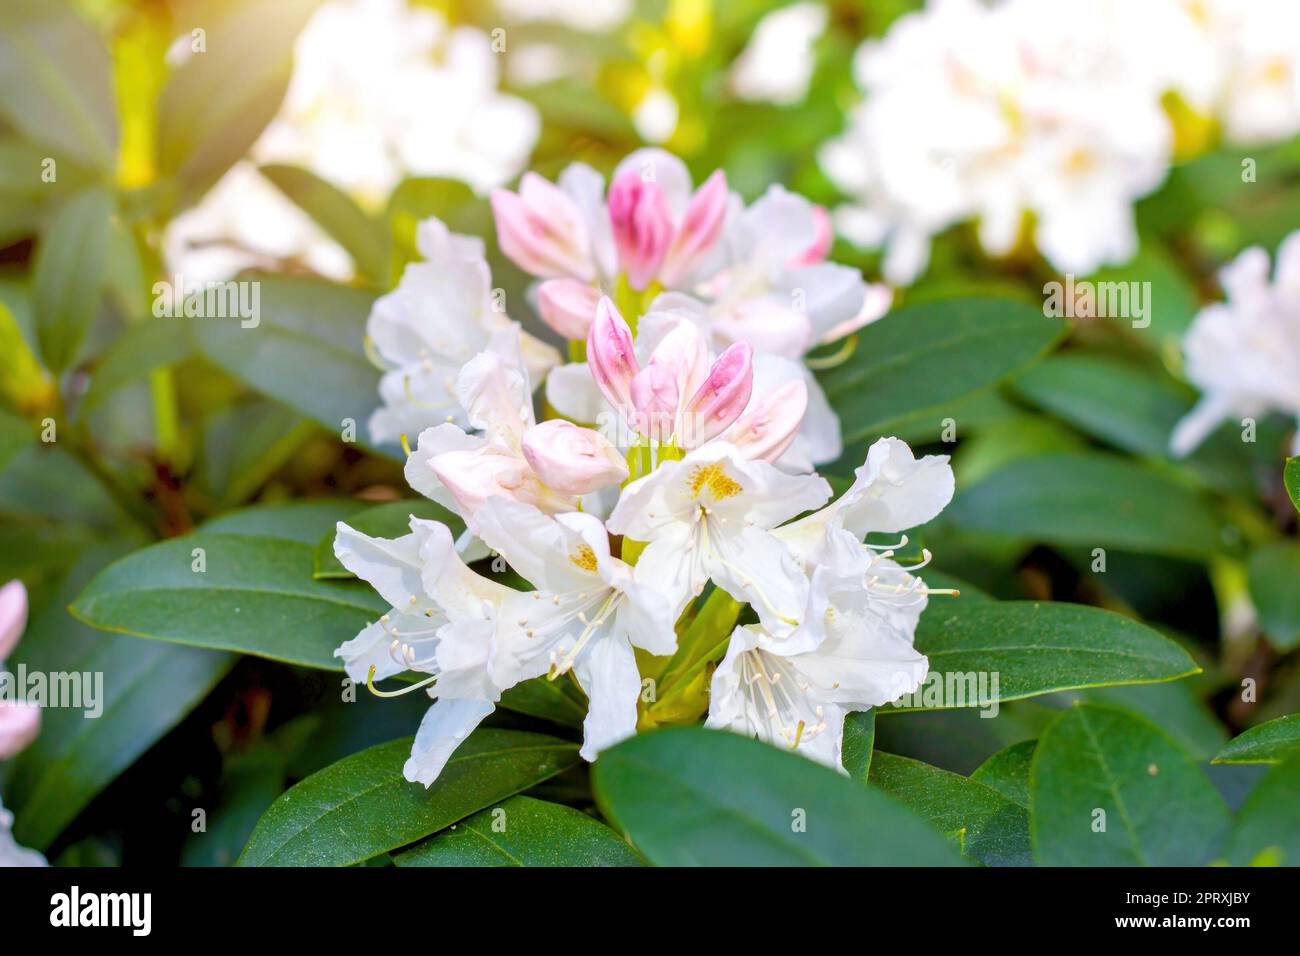 Bright pink and white Rhododendron hybridum Cunningham's White blossoming flowers with green leaves in the garden in spring. Stock Photo